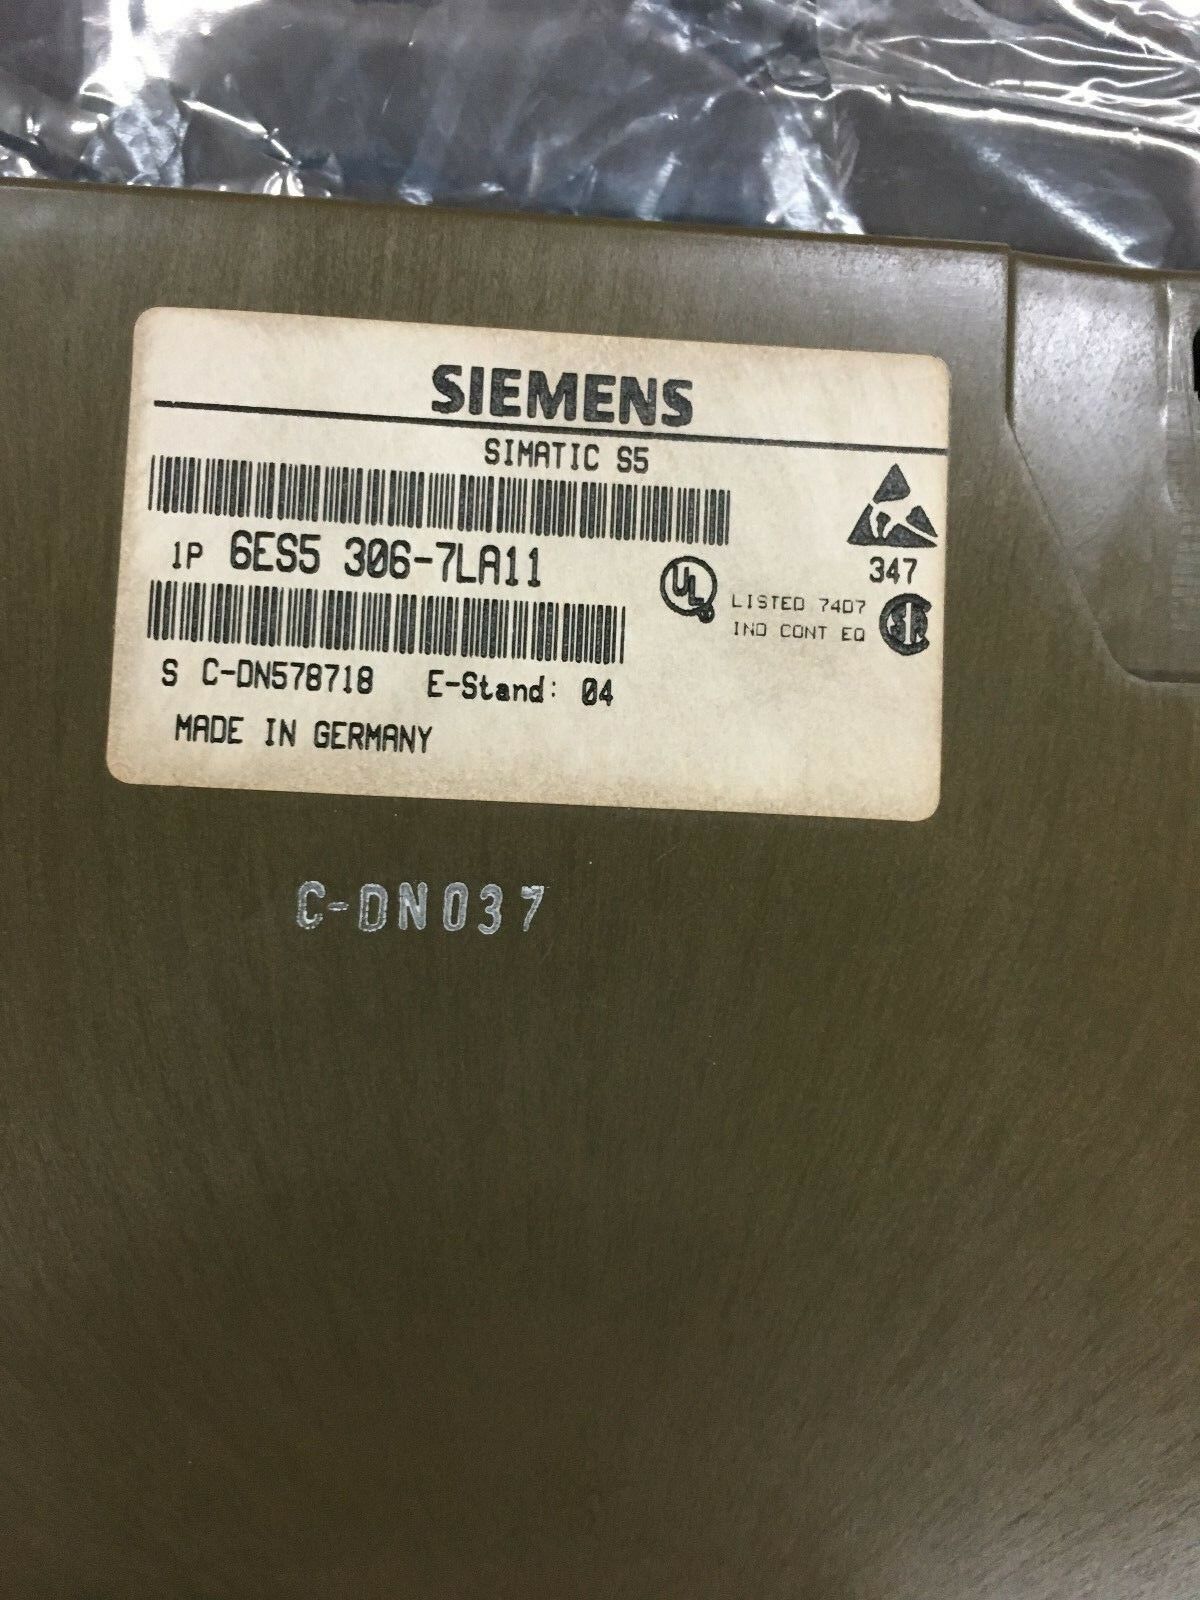 NEW IN BOX SIEMENS SIMATIC S5 COUNTER MODULE 6ES5 385-8MB11